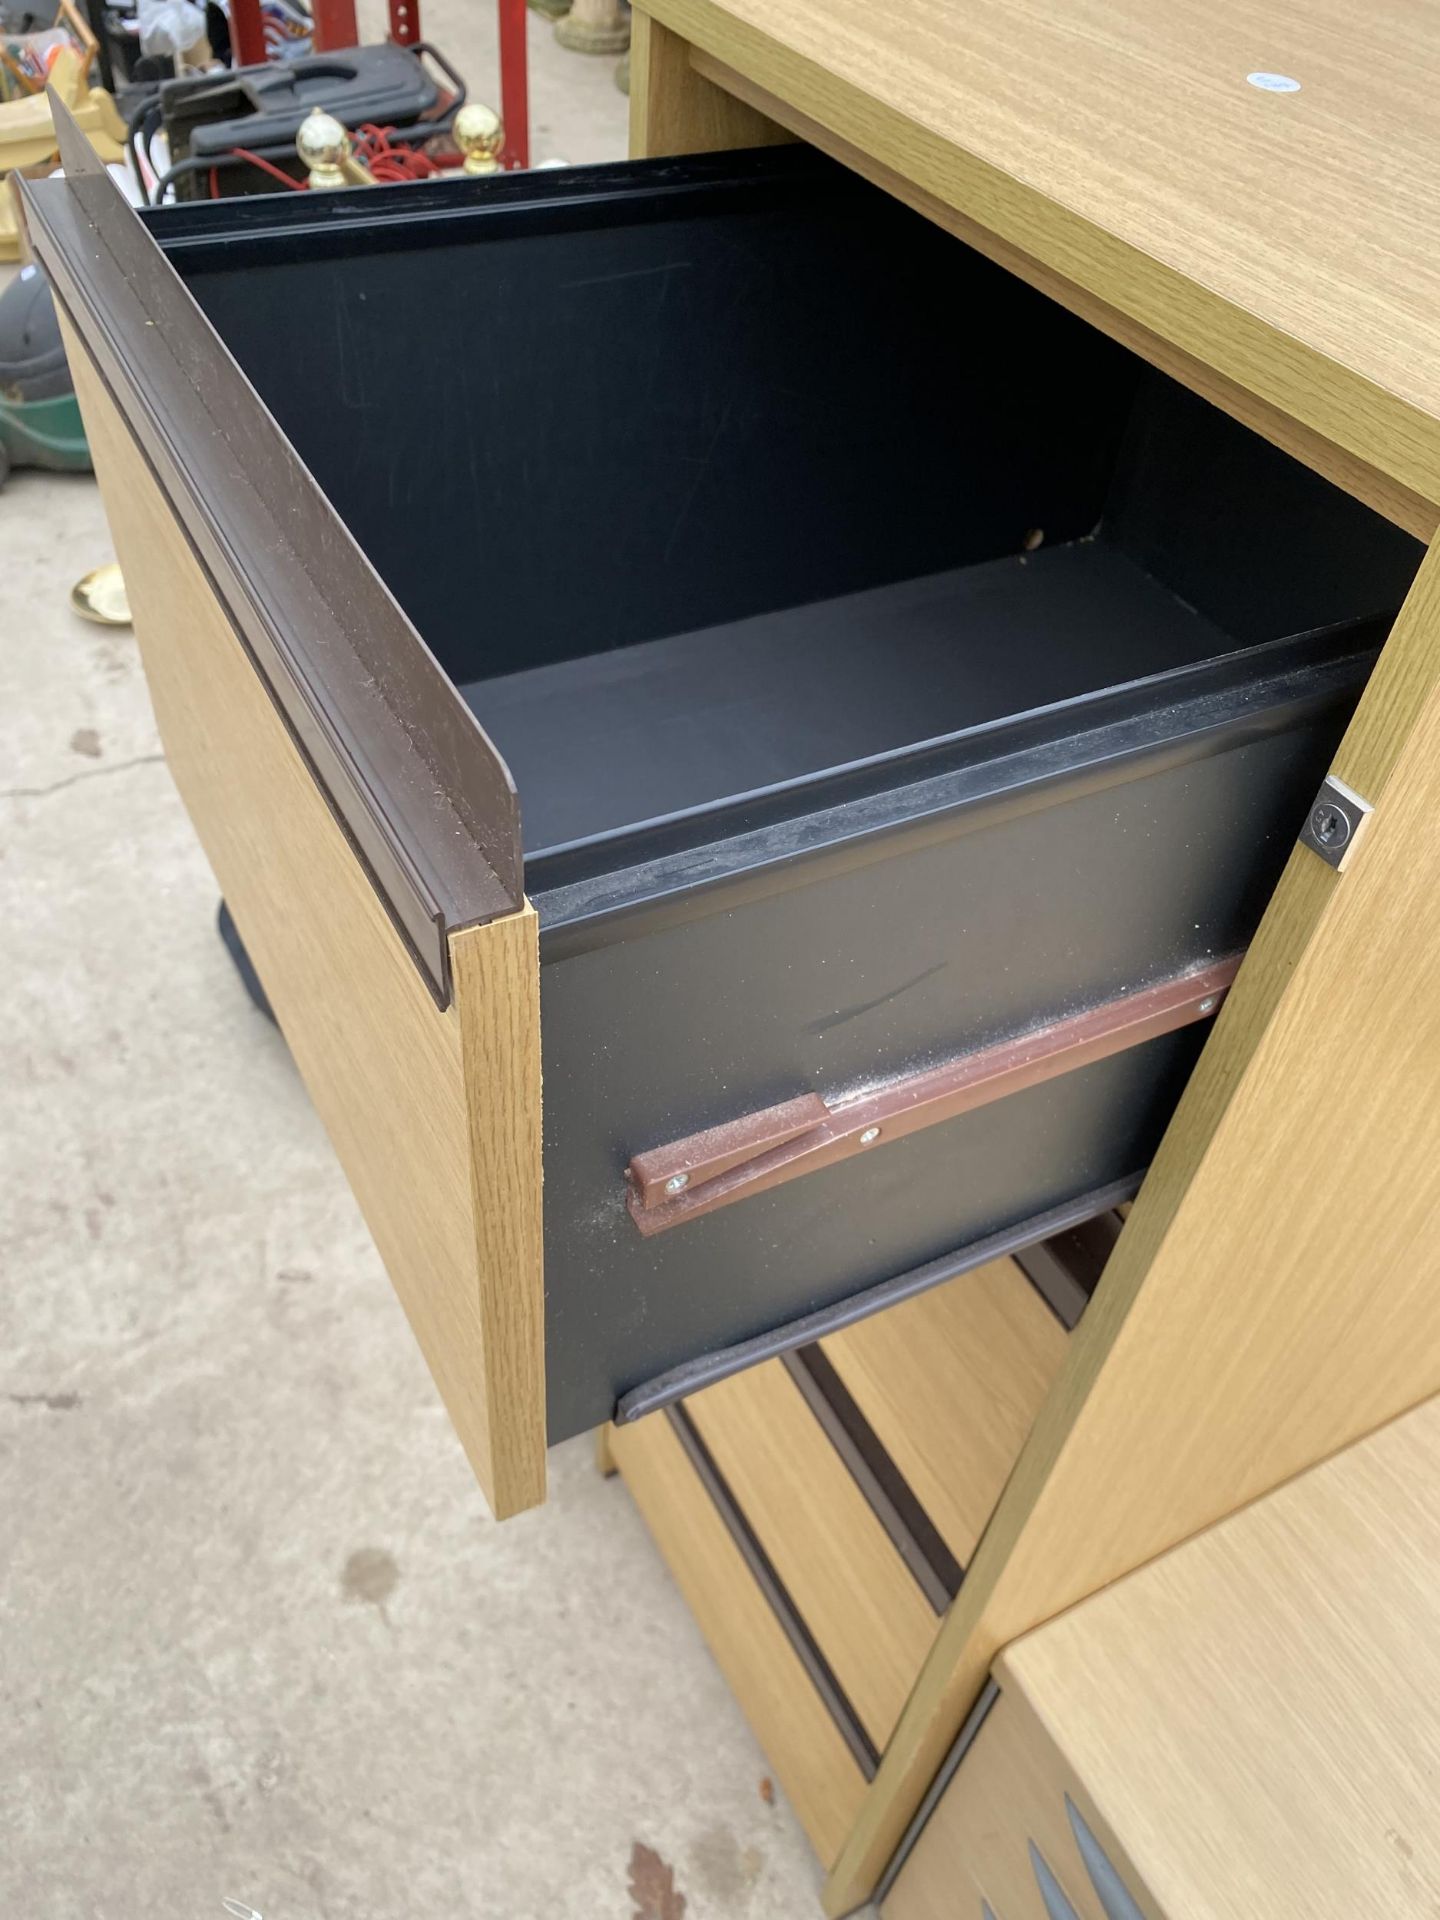 THREE LOW WOODEN THREE DRAWER FILING CABINETS AND A TALL FOUR DRAWER WOODEN FILING CABINET - Image 2 of 3